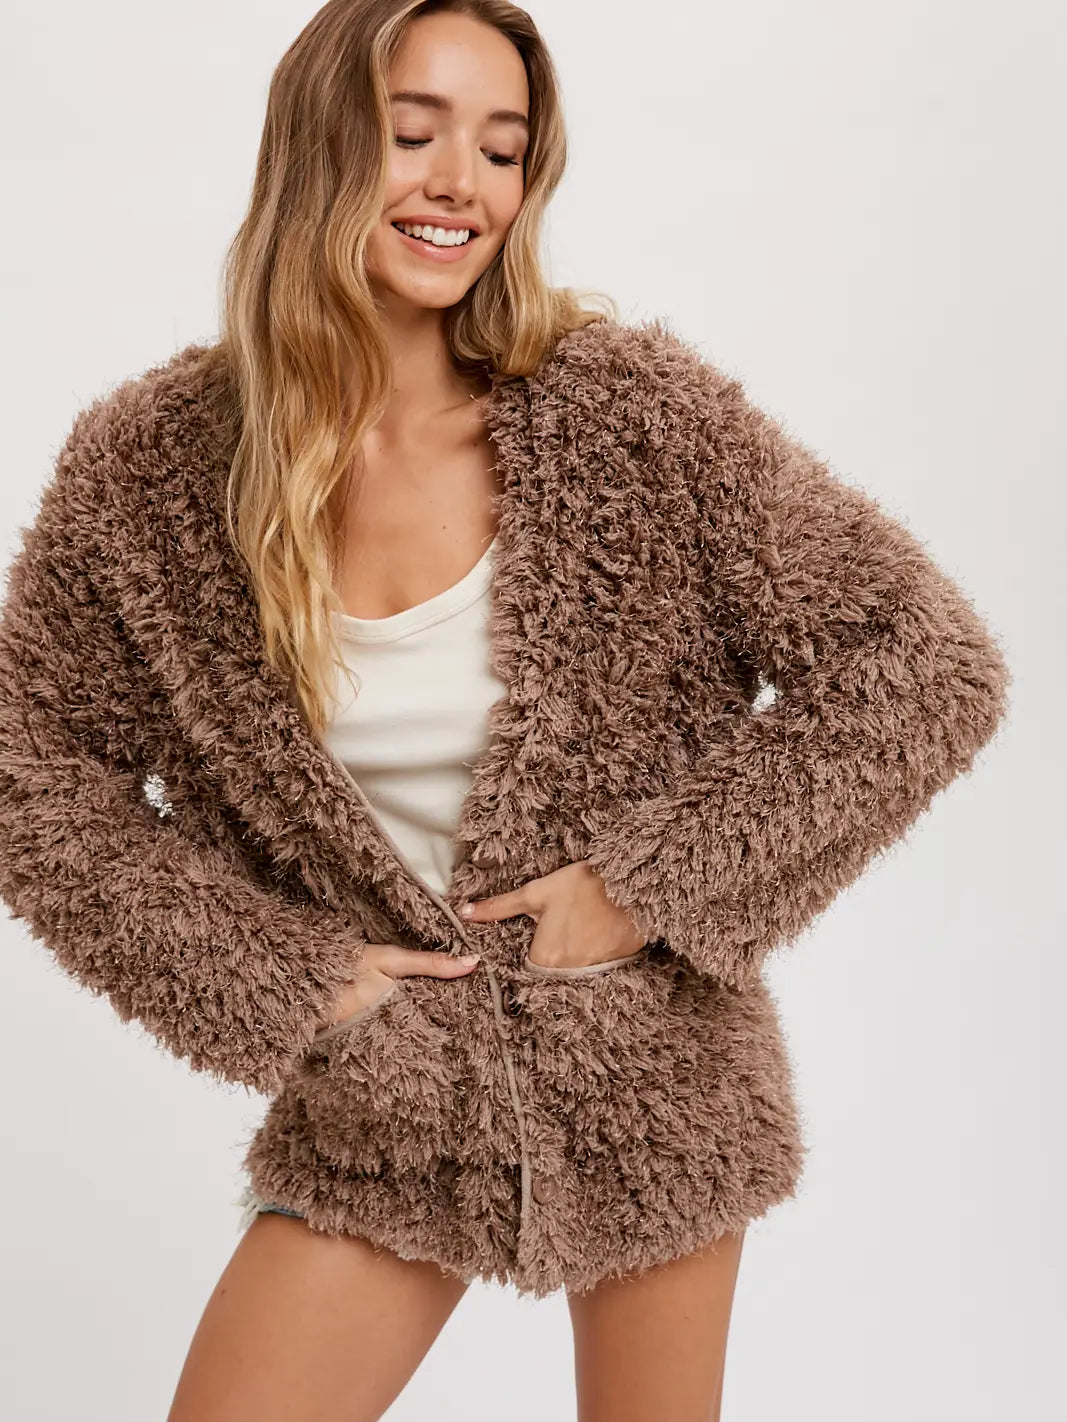 ** P/U at French Twist Only ** Shaggy Fur Suede Jacket